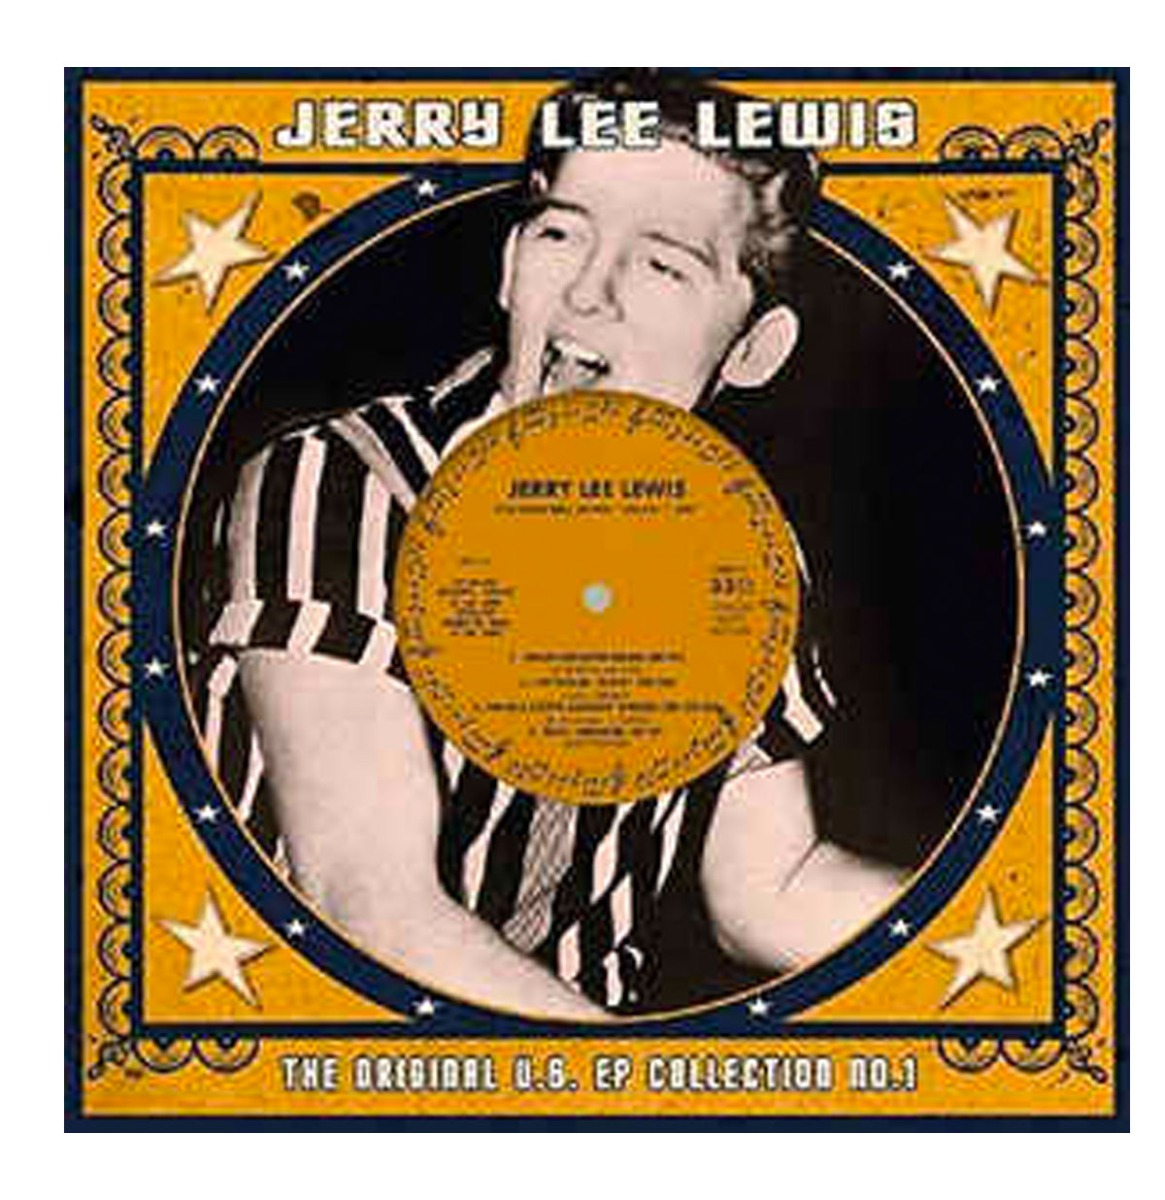 Jerry Lee Lewis - The Original U.S. EP Collection No.1